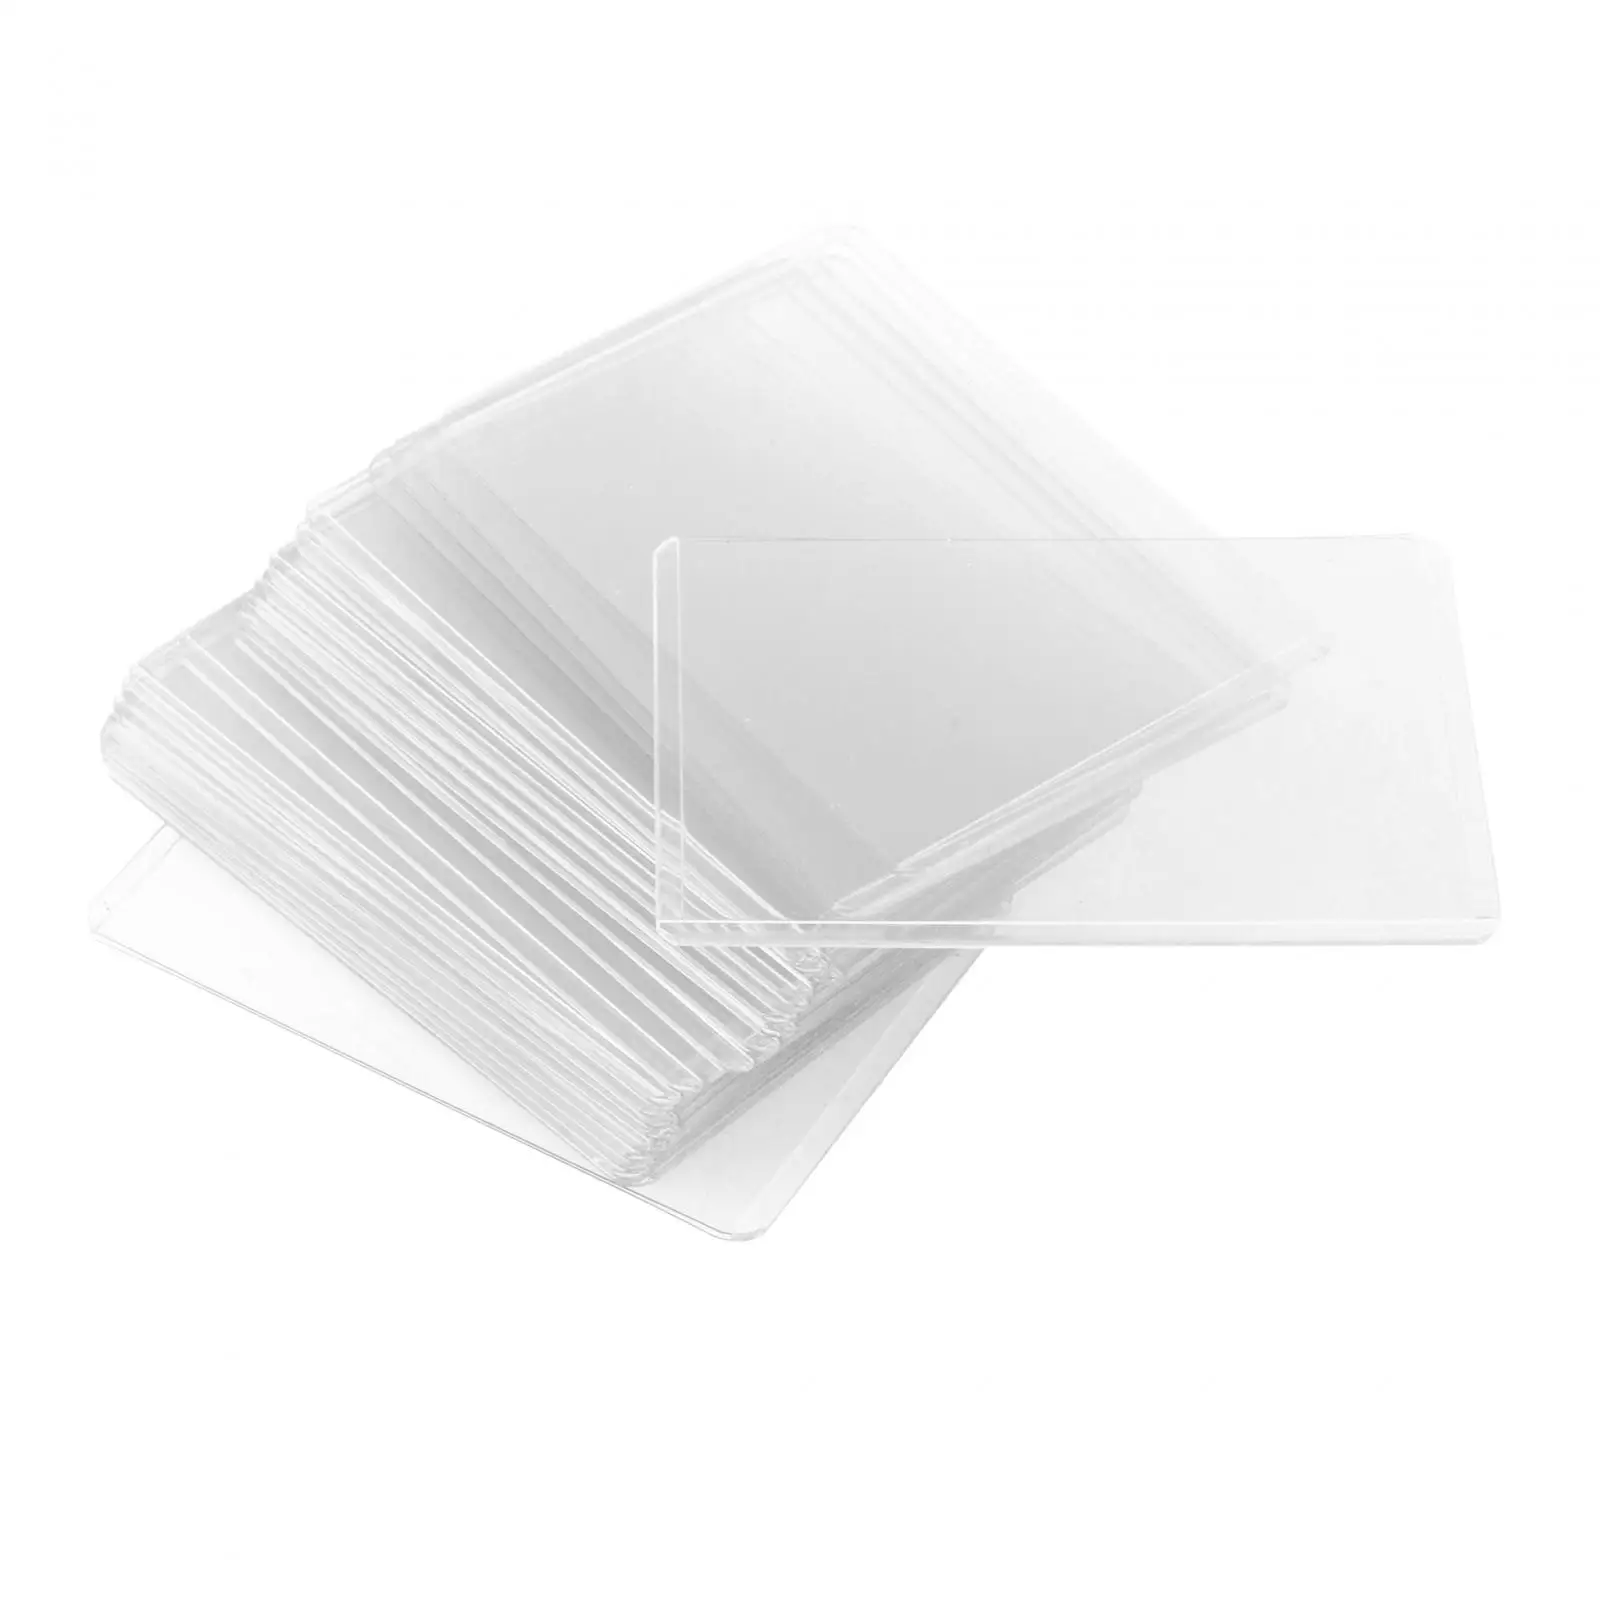 

25 Pieces Card Sleeves Durable Card Holder for Collectible Cards Baseball Sports Cards Trading Cards Golf Hockey Cards Hobbyists